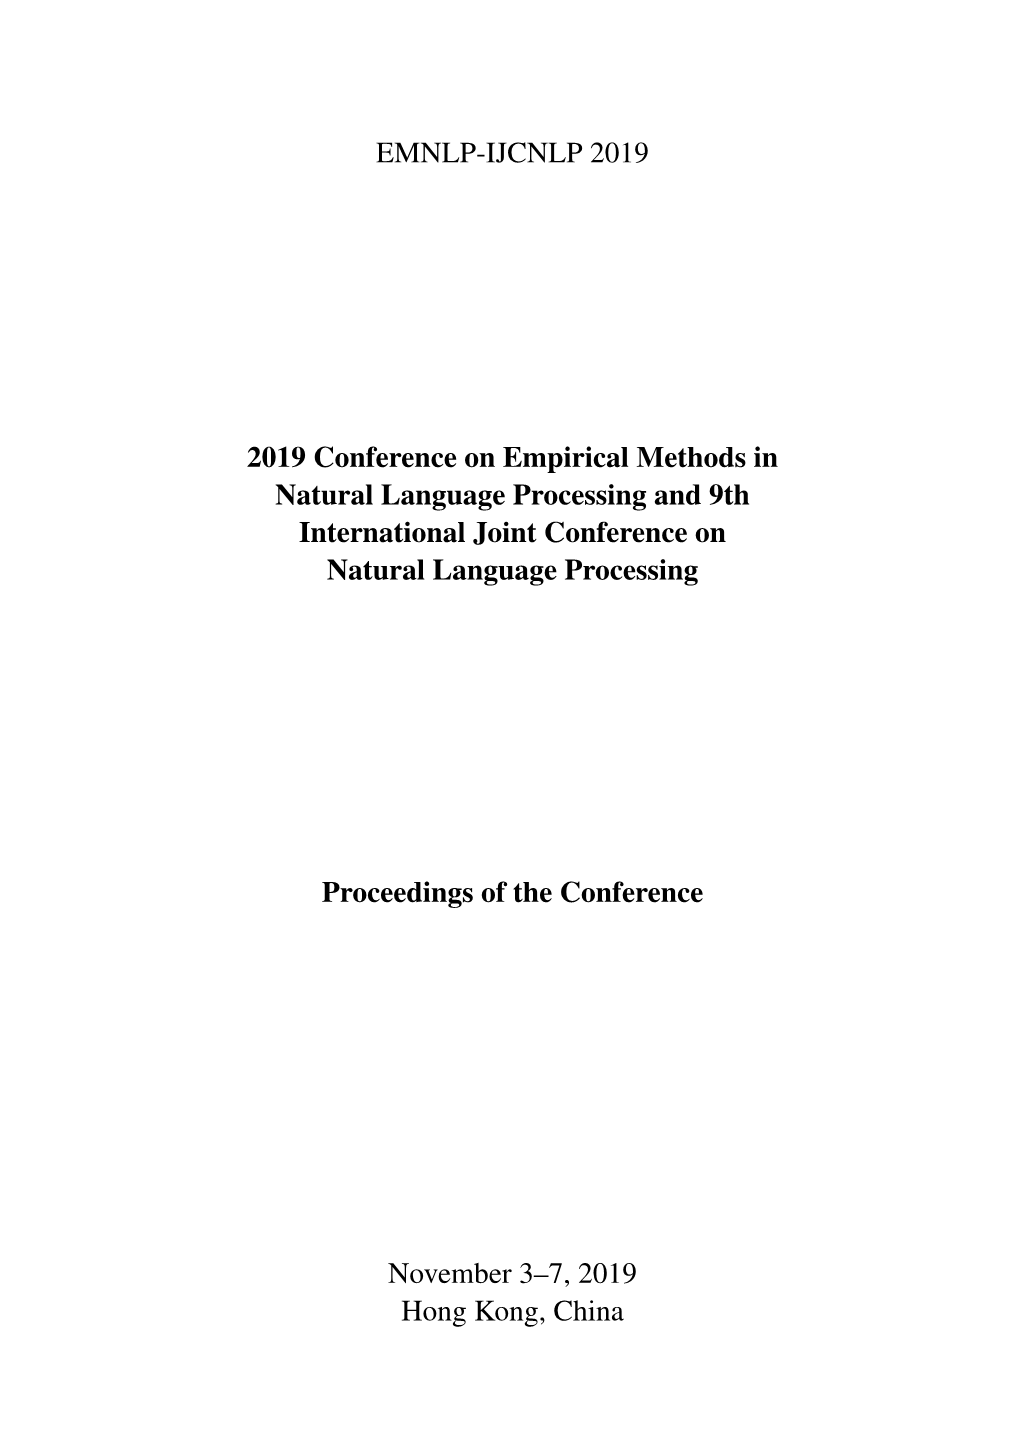 Proceedings of the 2019 Conference on Empirical Methods in Natural